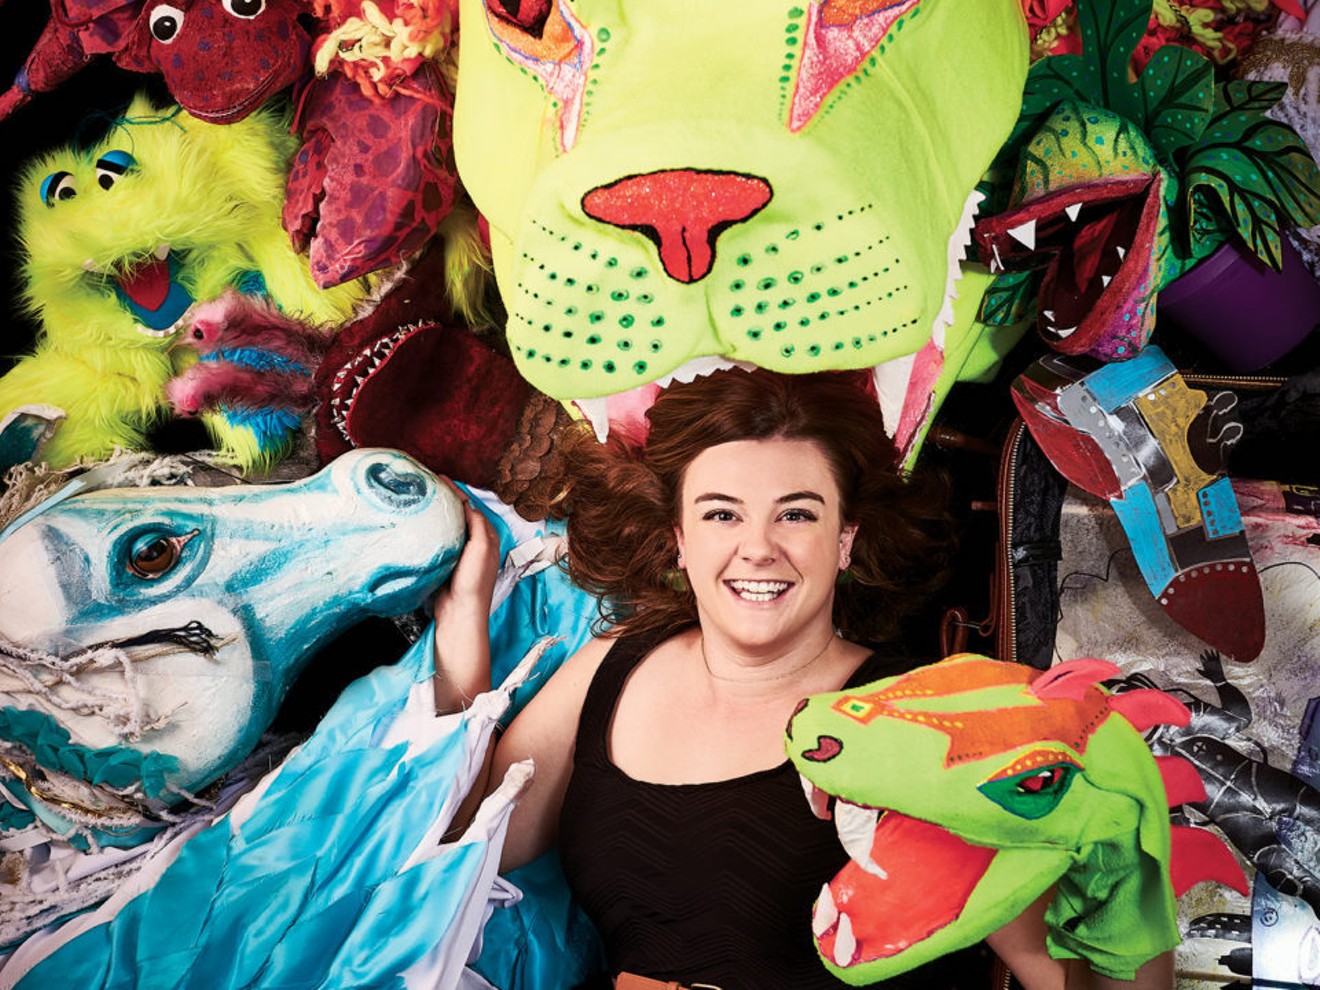 Katy Williams poses with all her colorful puppet creations.